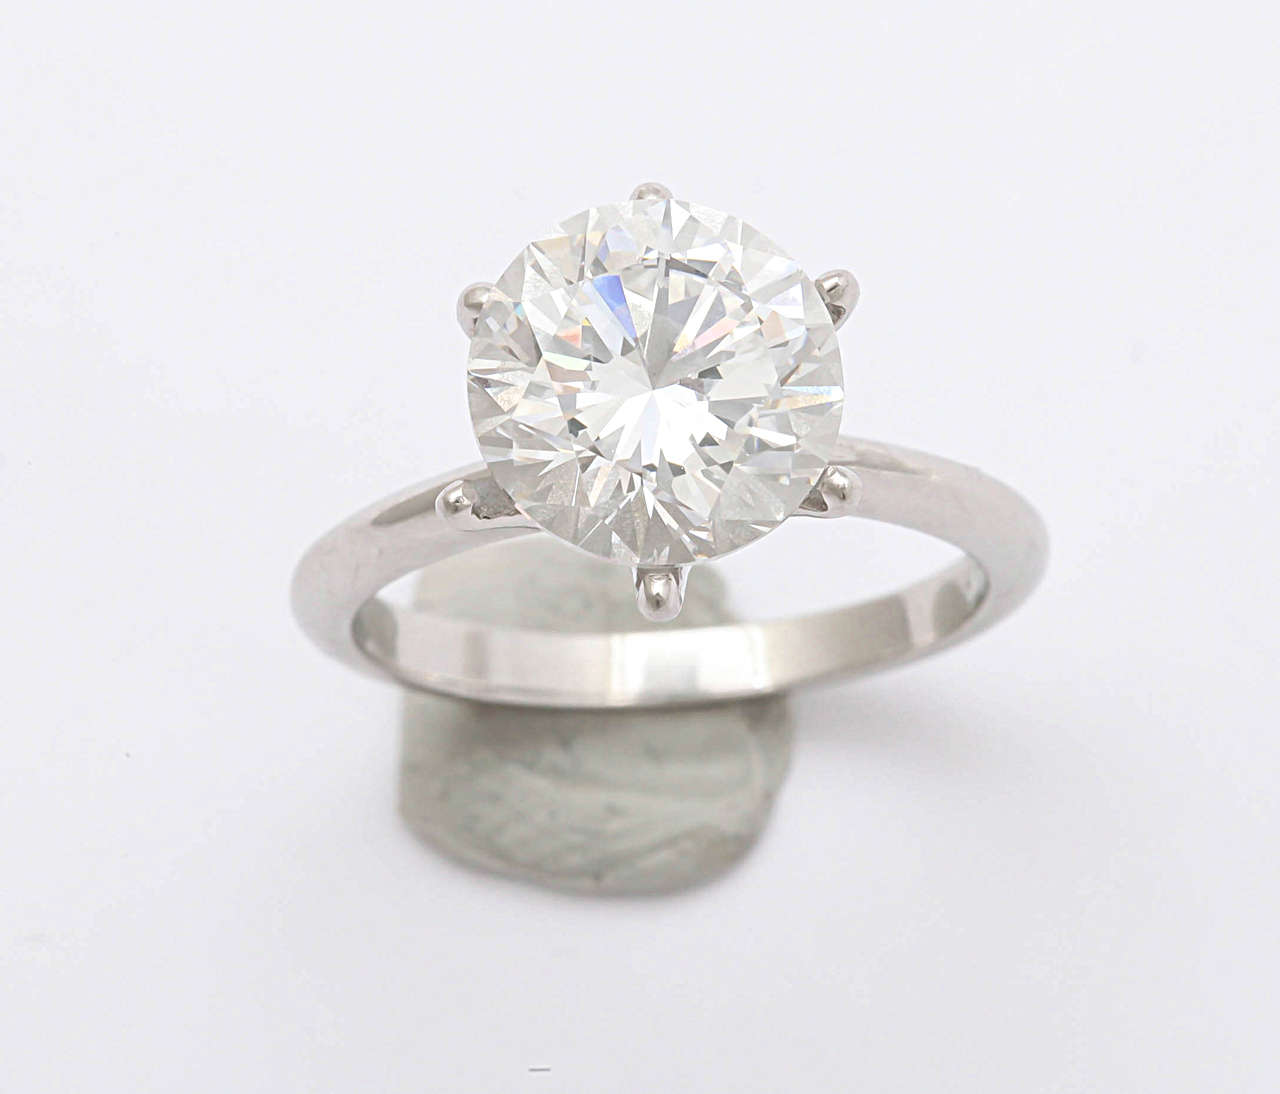 Gorgeous 5.01 CT round brilliant diamond; Color: E, Clairty VS2

GIA Certified 2165630517

Measurements 
10.72-10.78 * 6.78mm